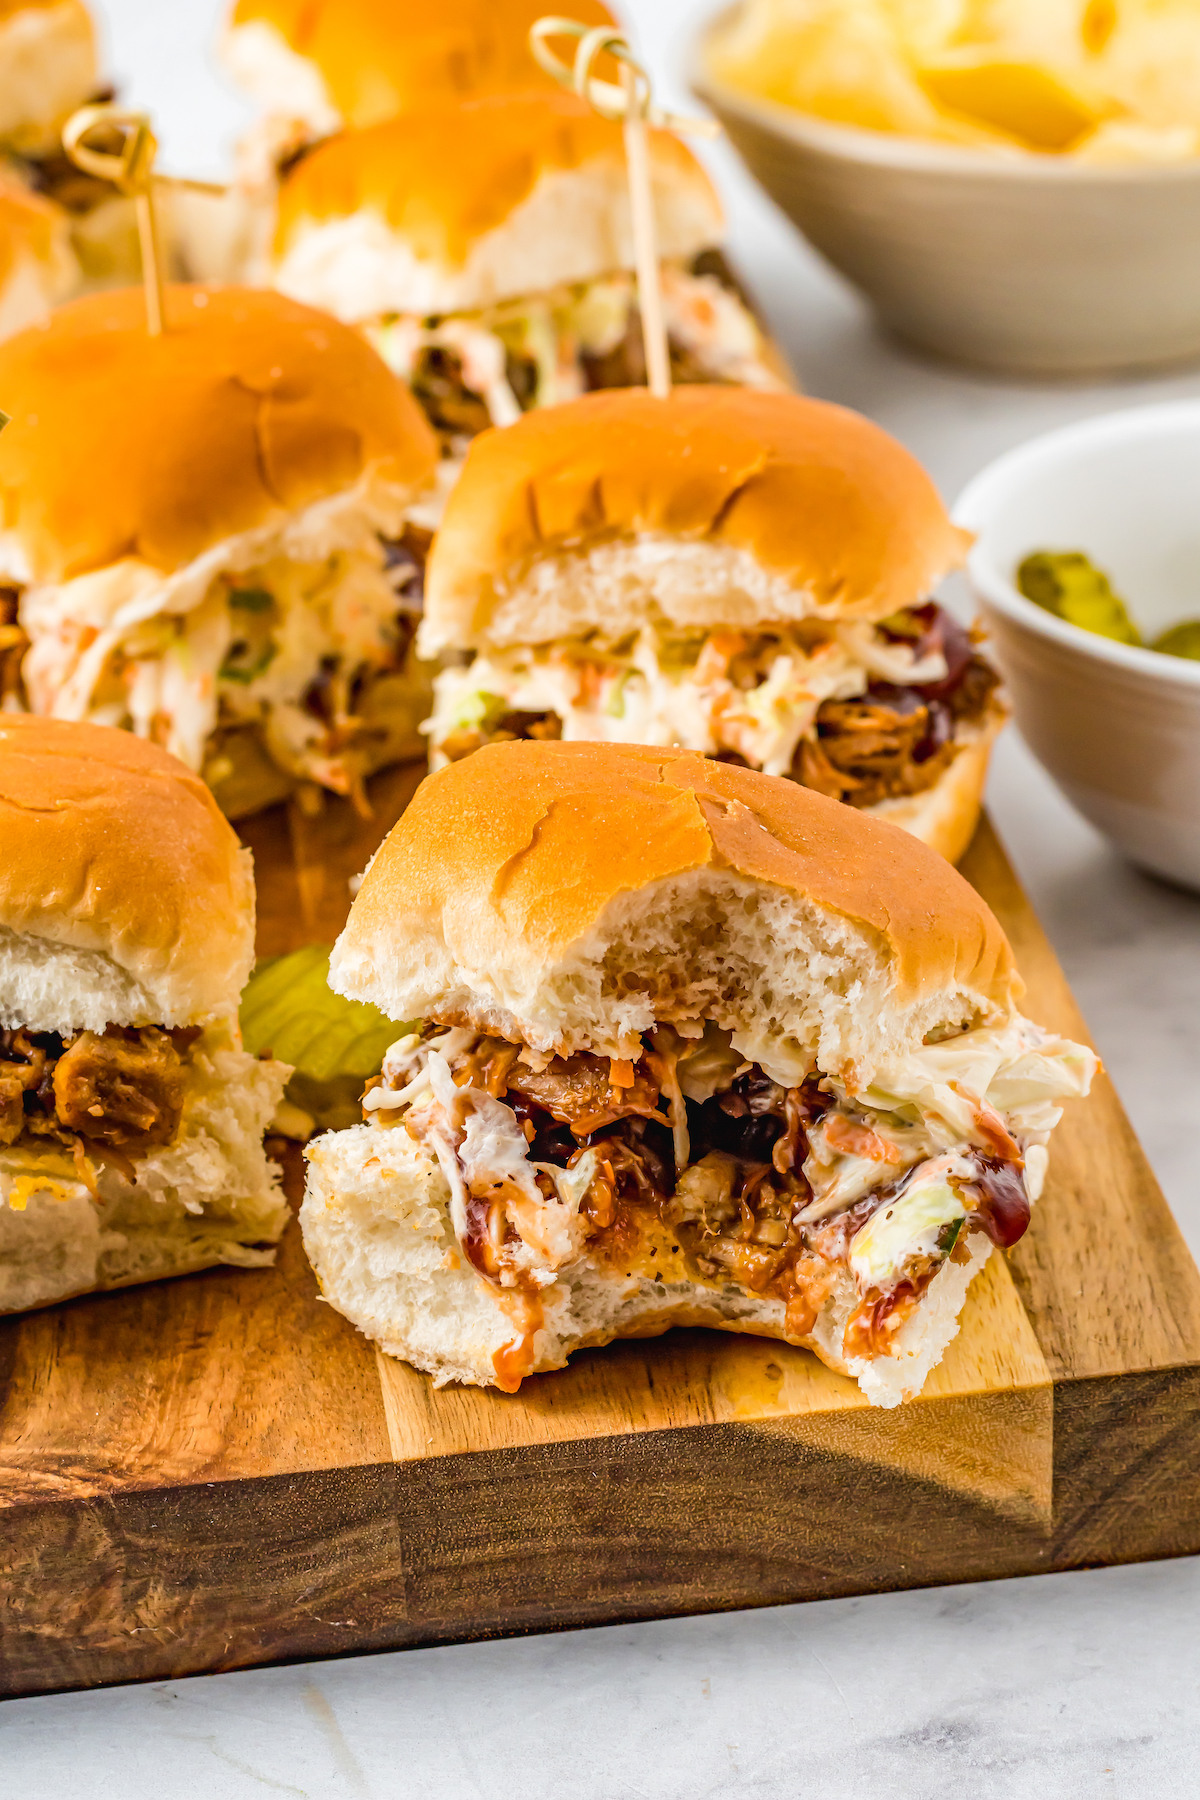 Pulled pork sliders on a cuttinng board. One has had a bite taken out of it.